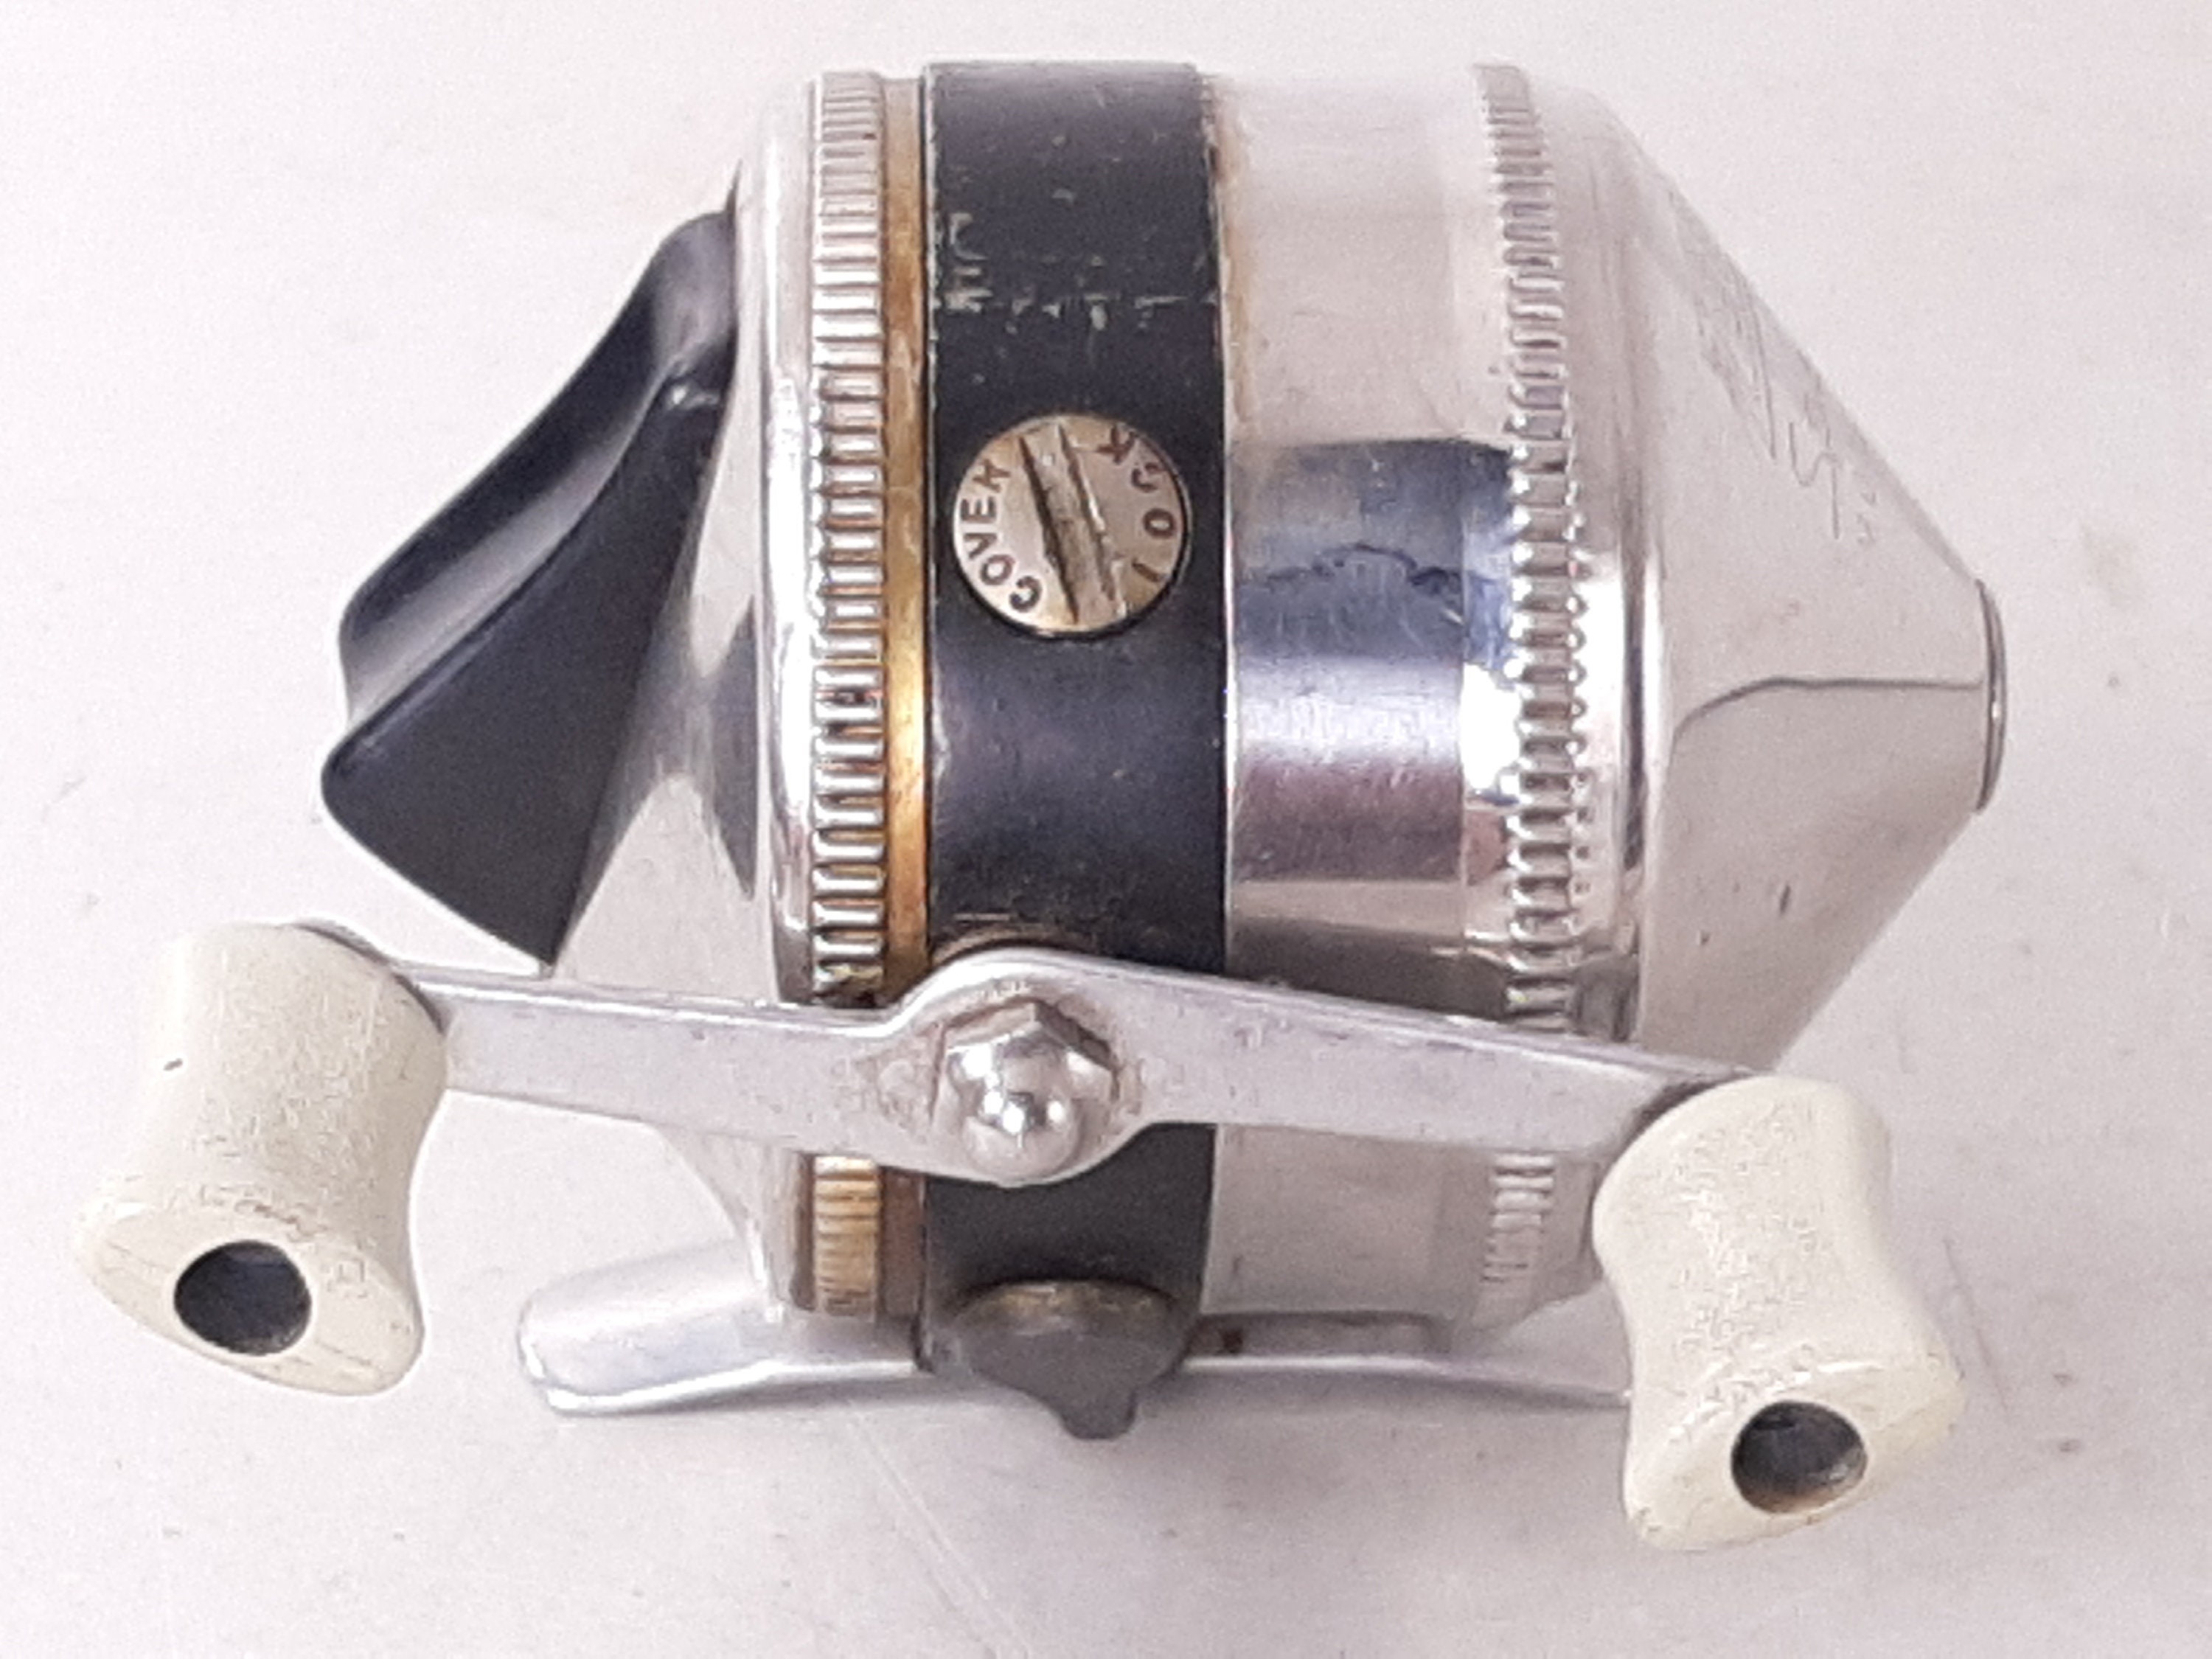 Vintage Zebco Spinner Model 33 Spincasting Reel With Single Rivet Foot, No  Damage, Mild Wear, Works Properly but Needs Cleaning & Lube 